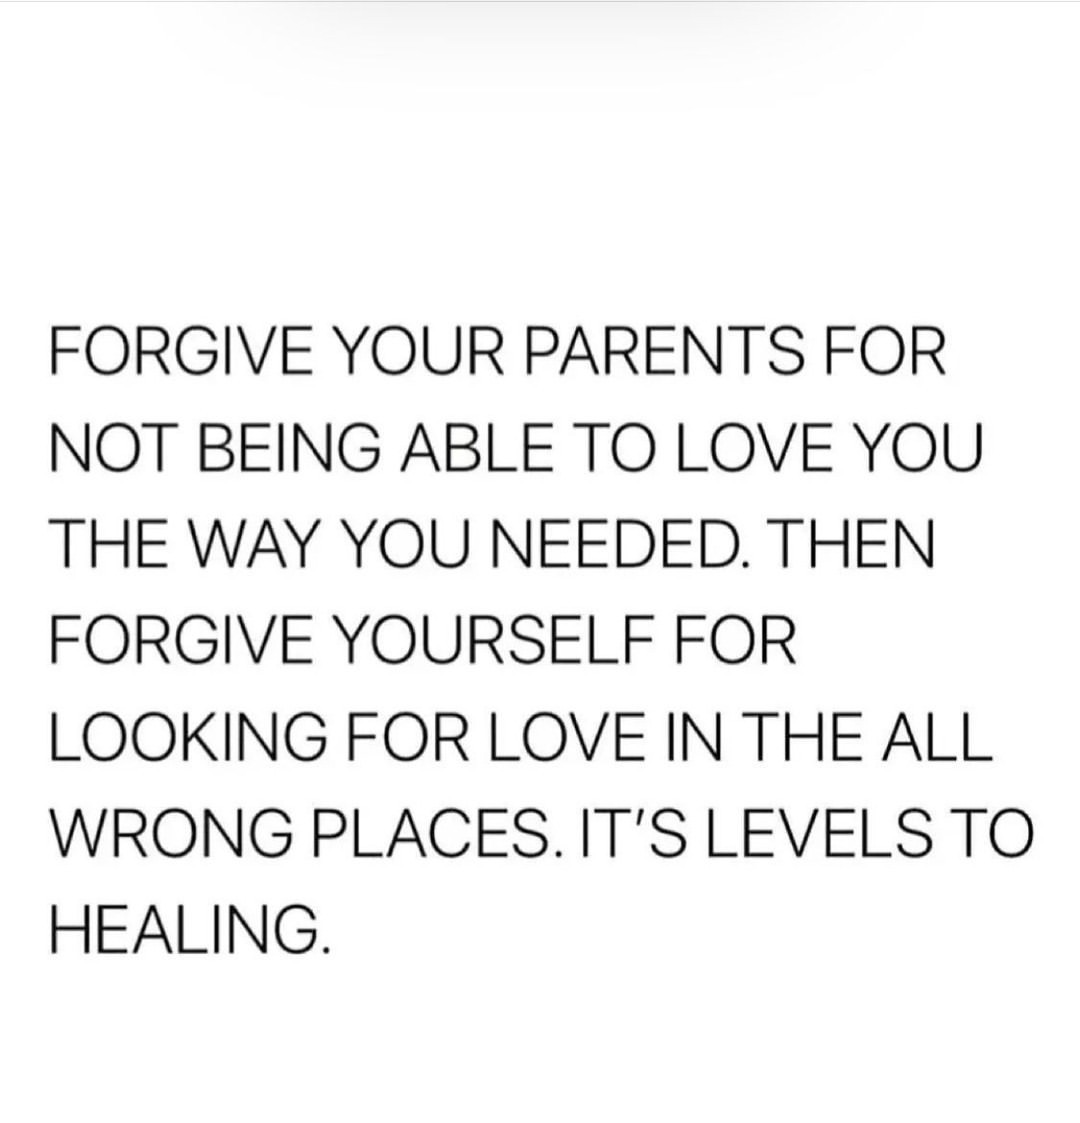 Forgive your parents for not being able to love you the way you needed. Then forgive yourself for looking for love in the all wrong places. It's levels to healing.